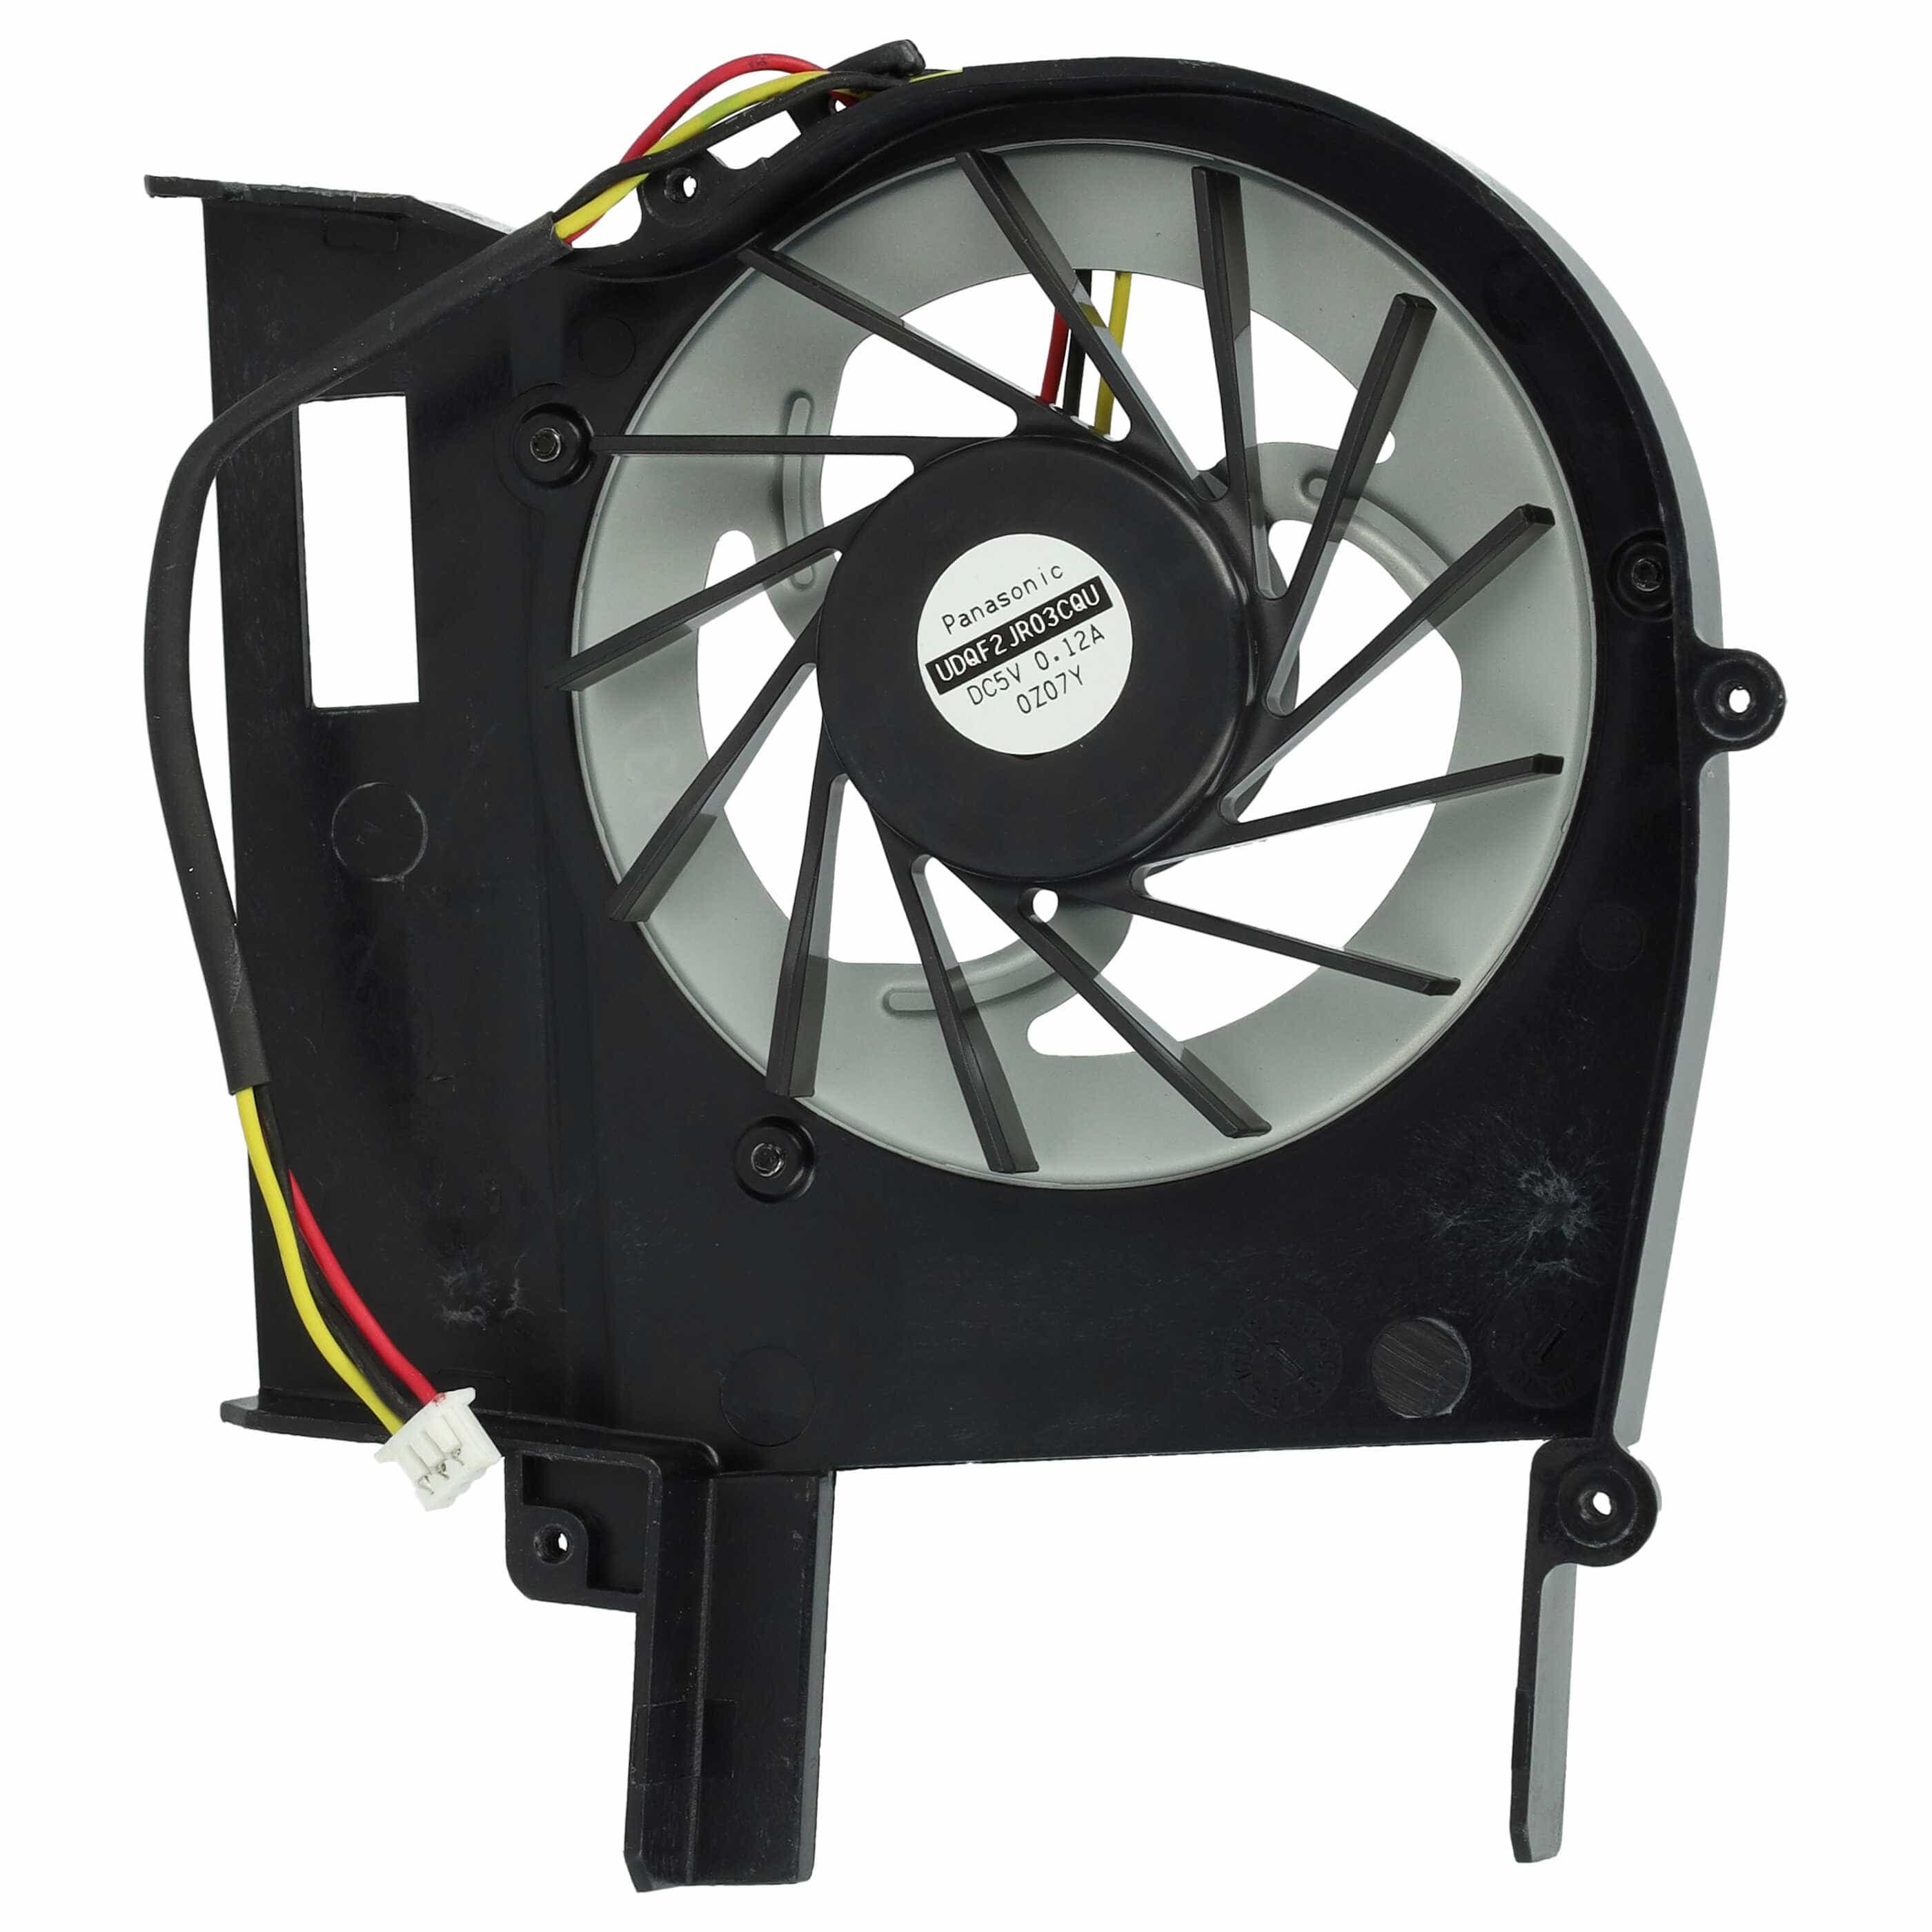 CPU / GPU Fan suitable for Sony Vaio MCF-C29BM05 Notebook 85 x 93 x 12 mm